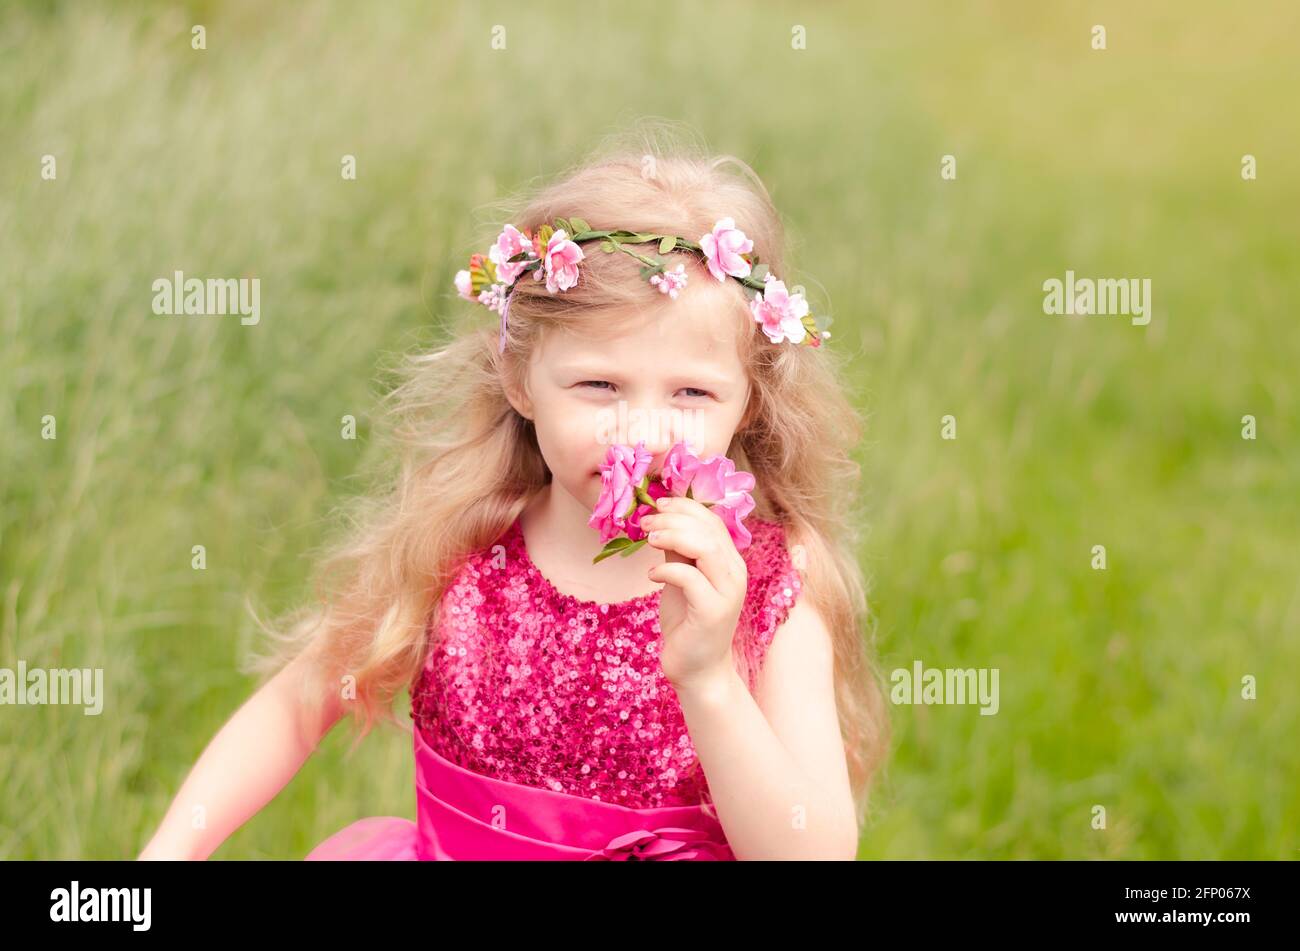 beautiful blond girl in pink dress holding pink rose flower Stock Photo